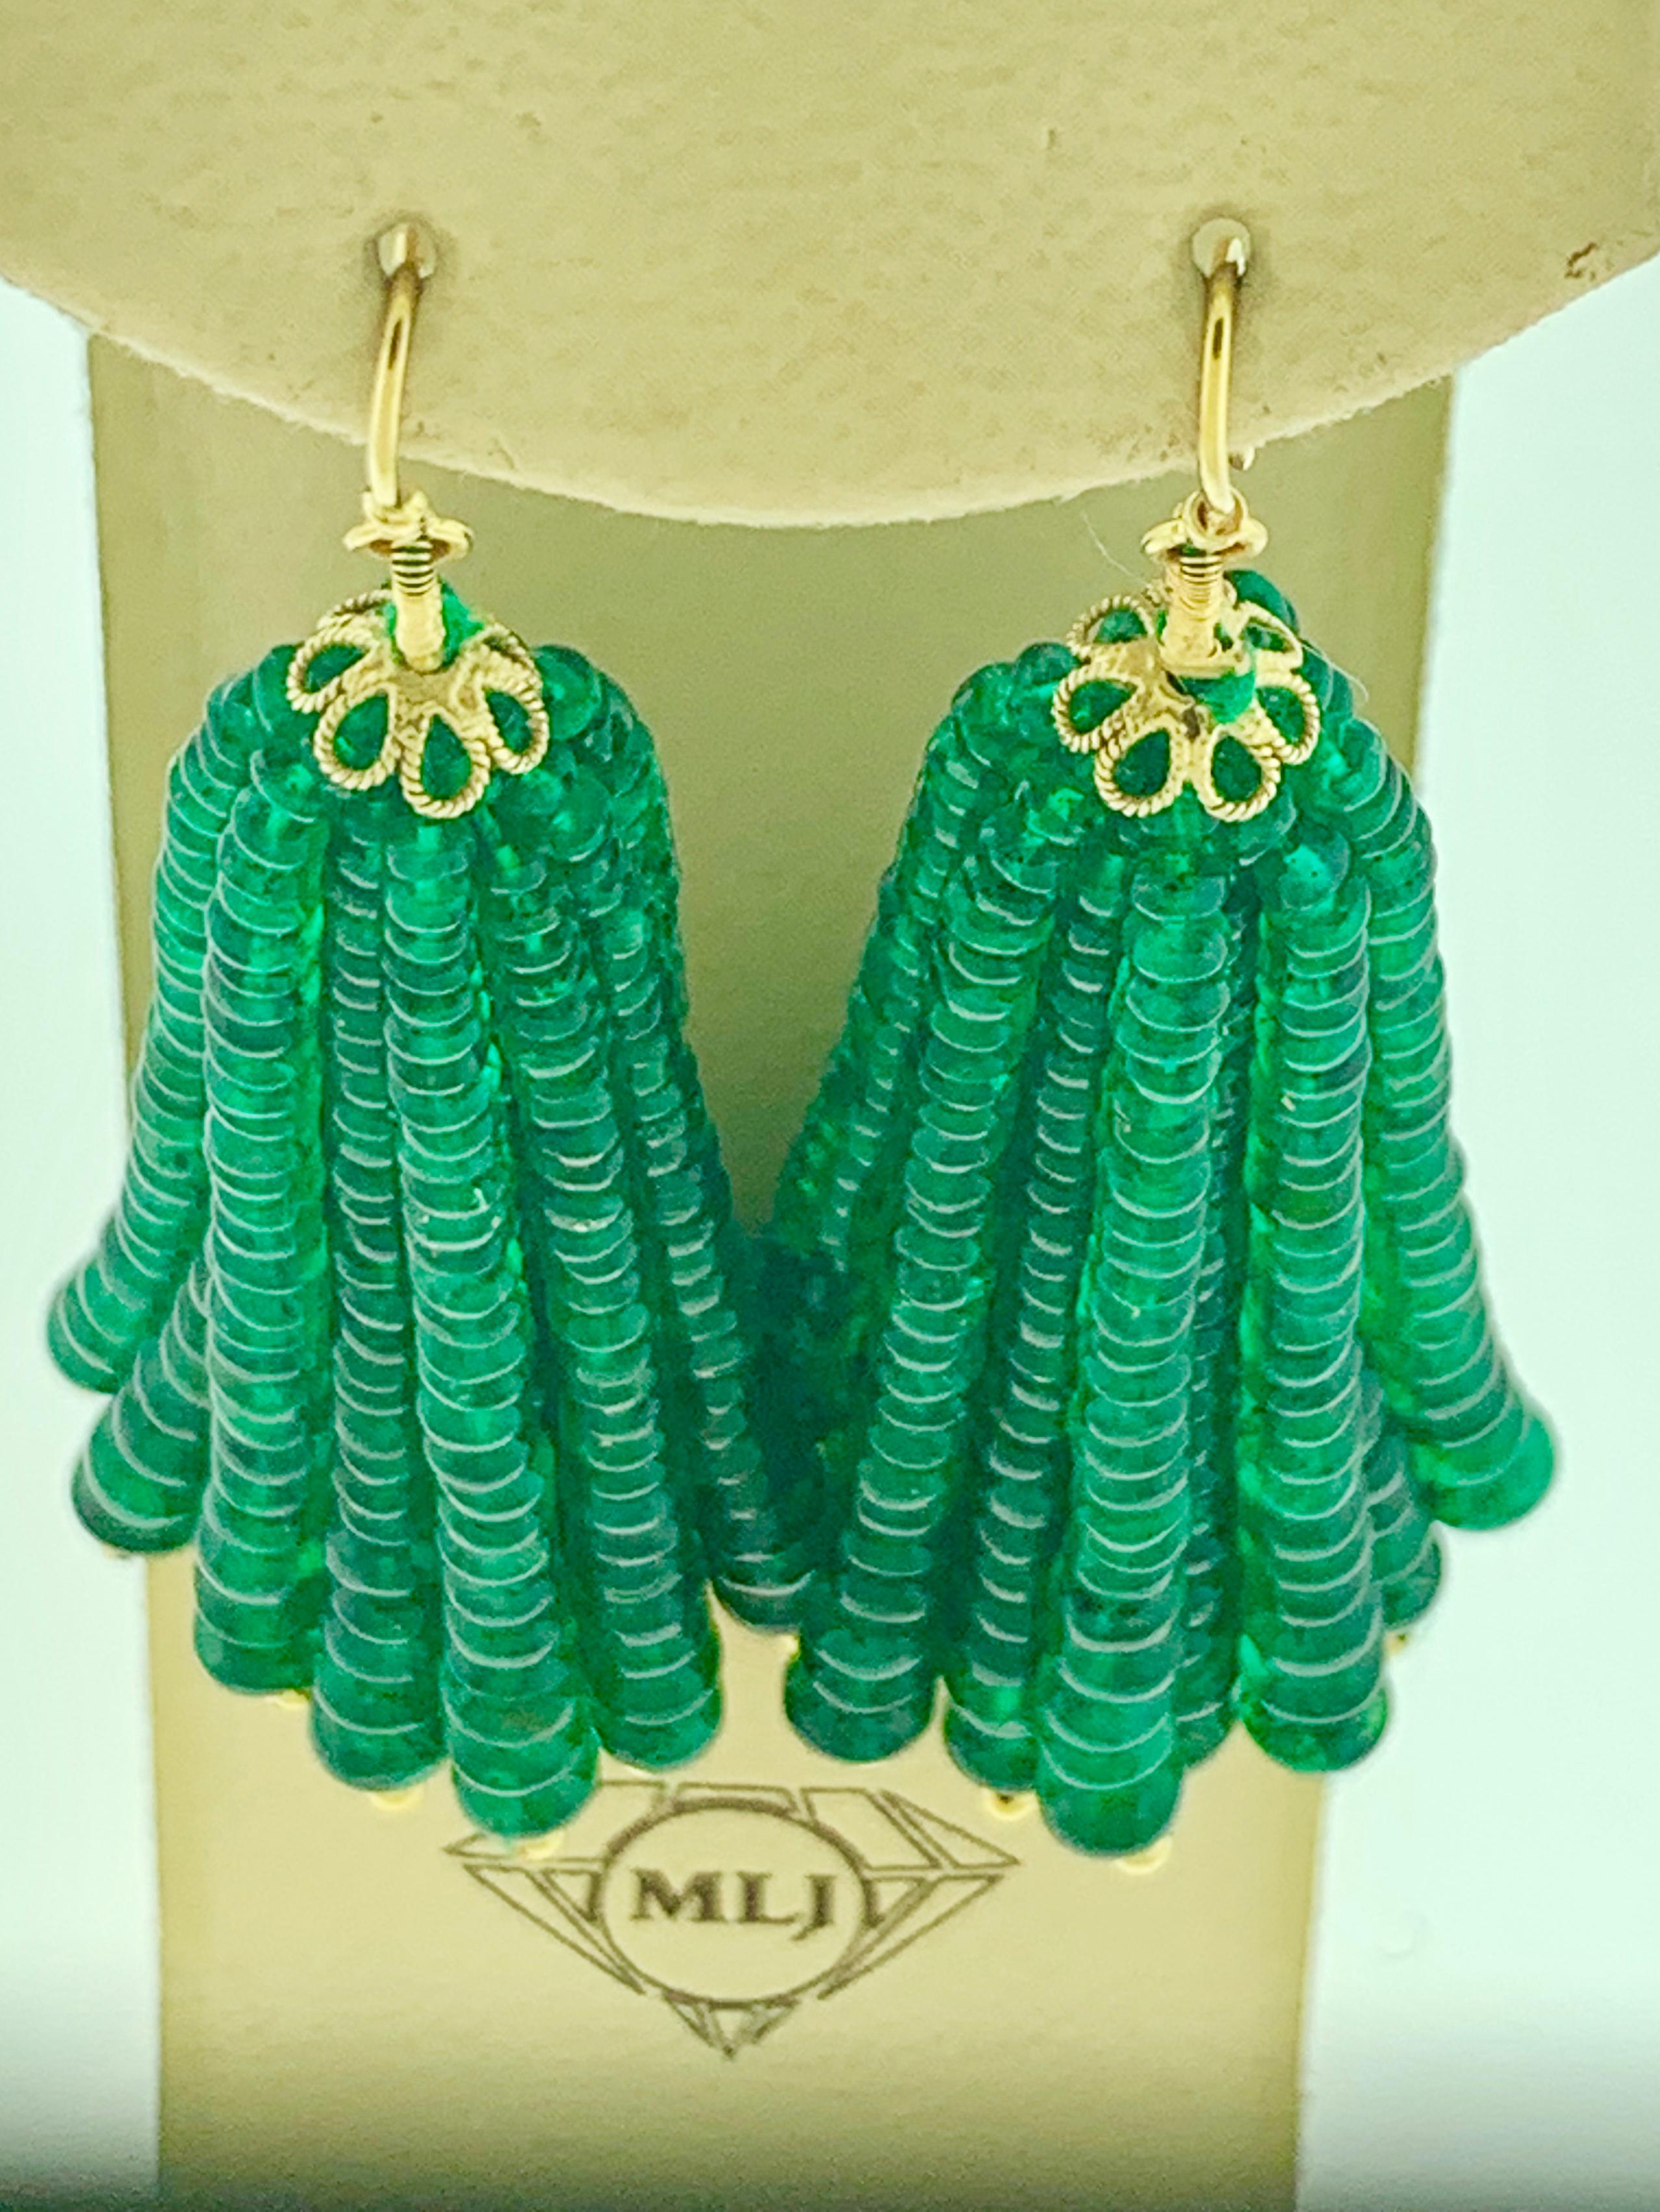 198 Carat Colombian Emerald Beads Hanging Drop Earrings 18 Karat Gold In Excellent Condition For Sale In New York, NY